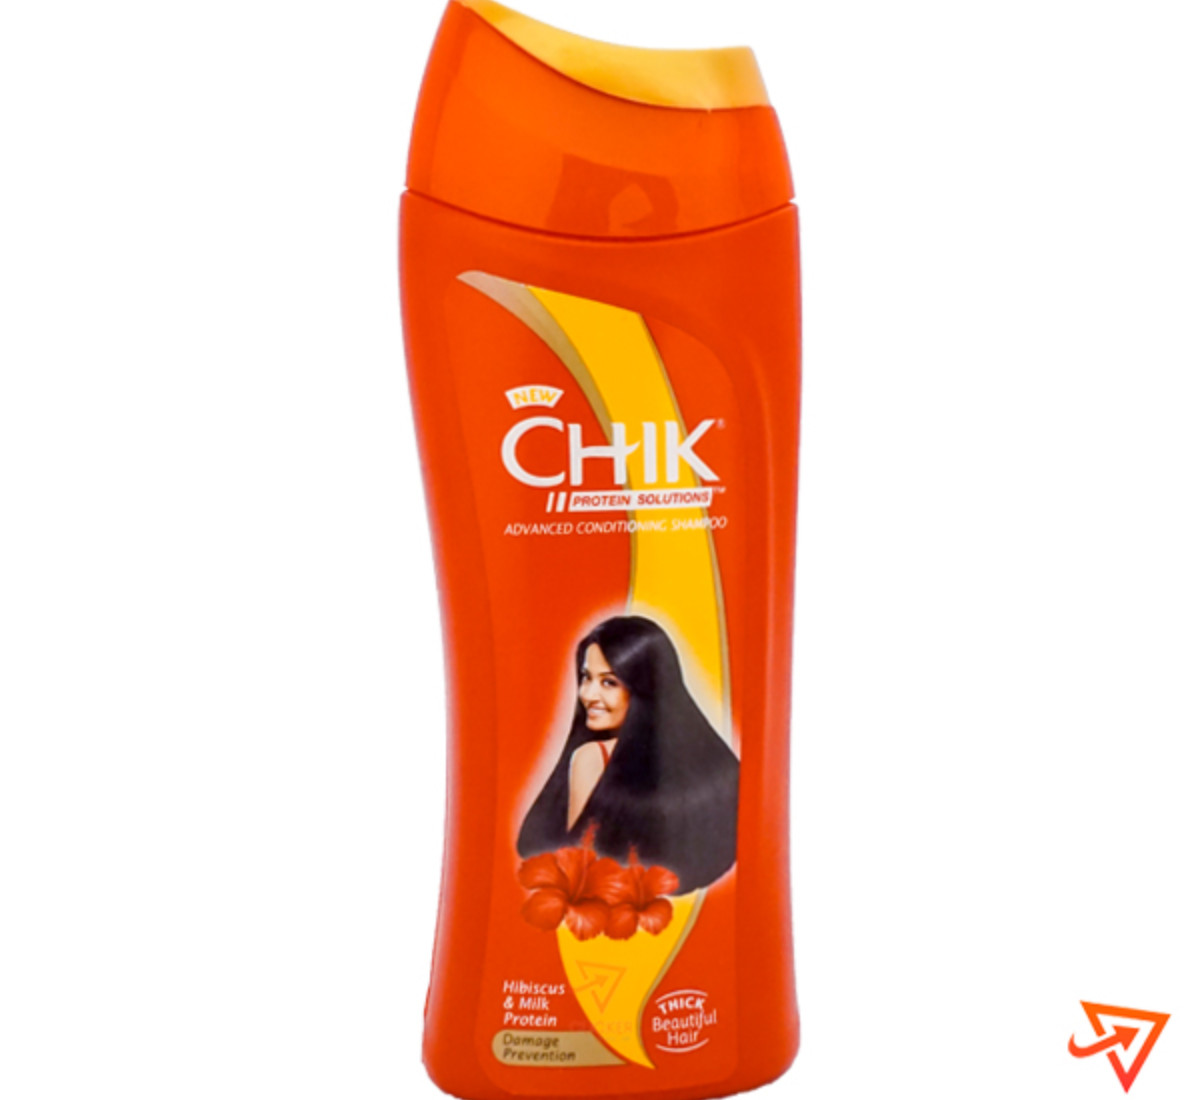 Clicker product 180ml CHIK protein solutions advanced conditioning shampoo hibiscus and milk 1069